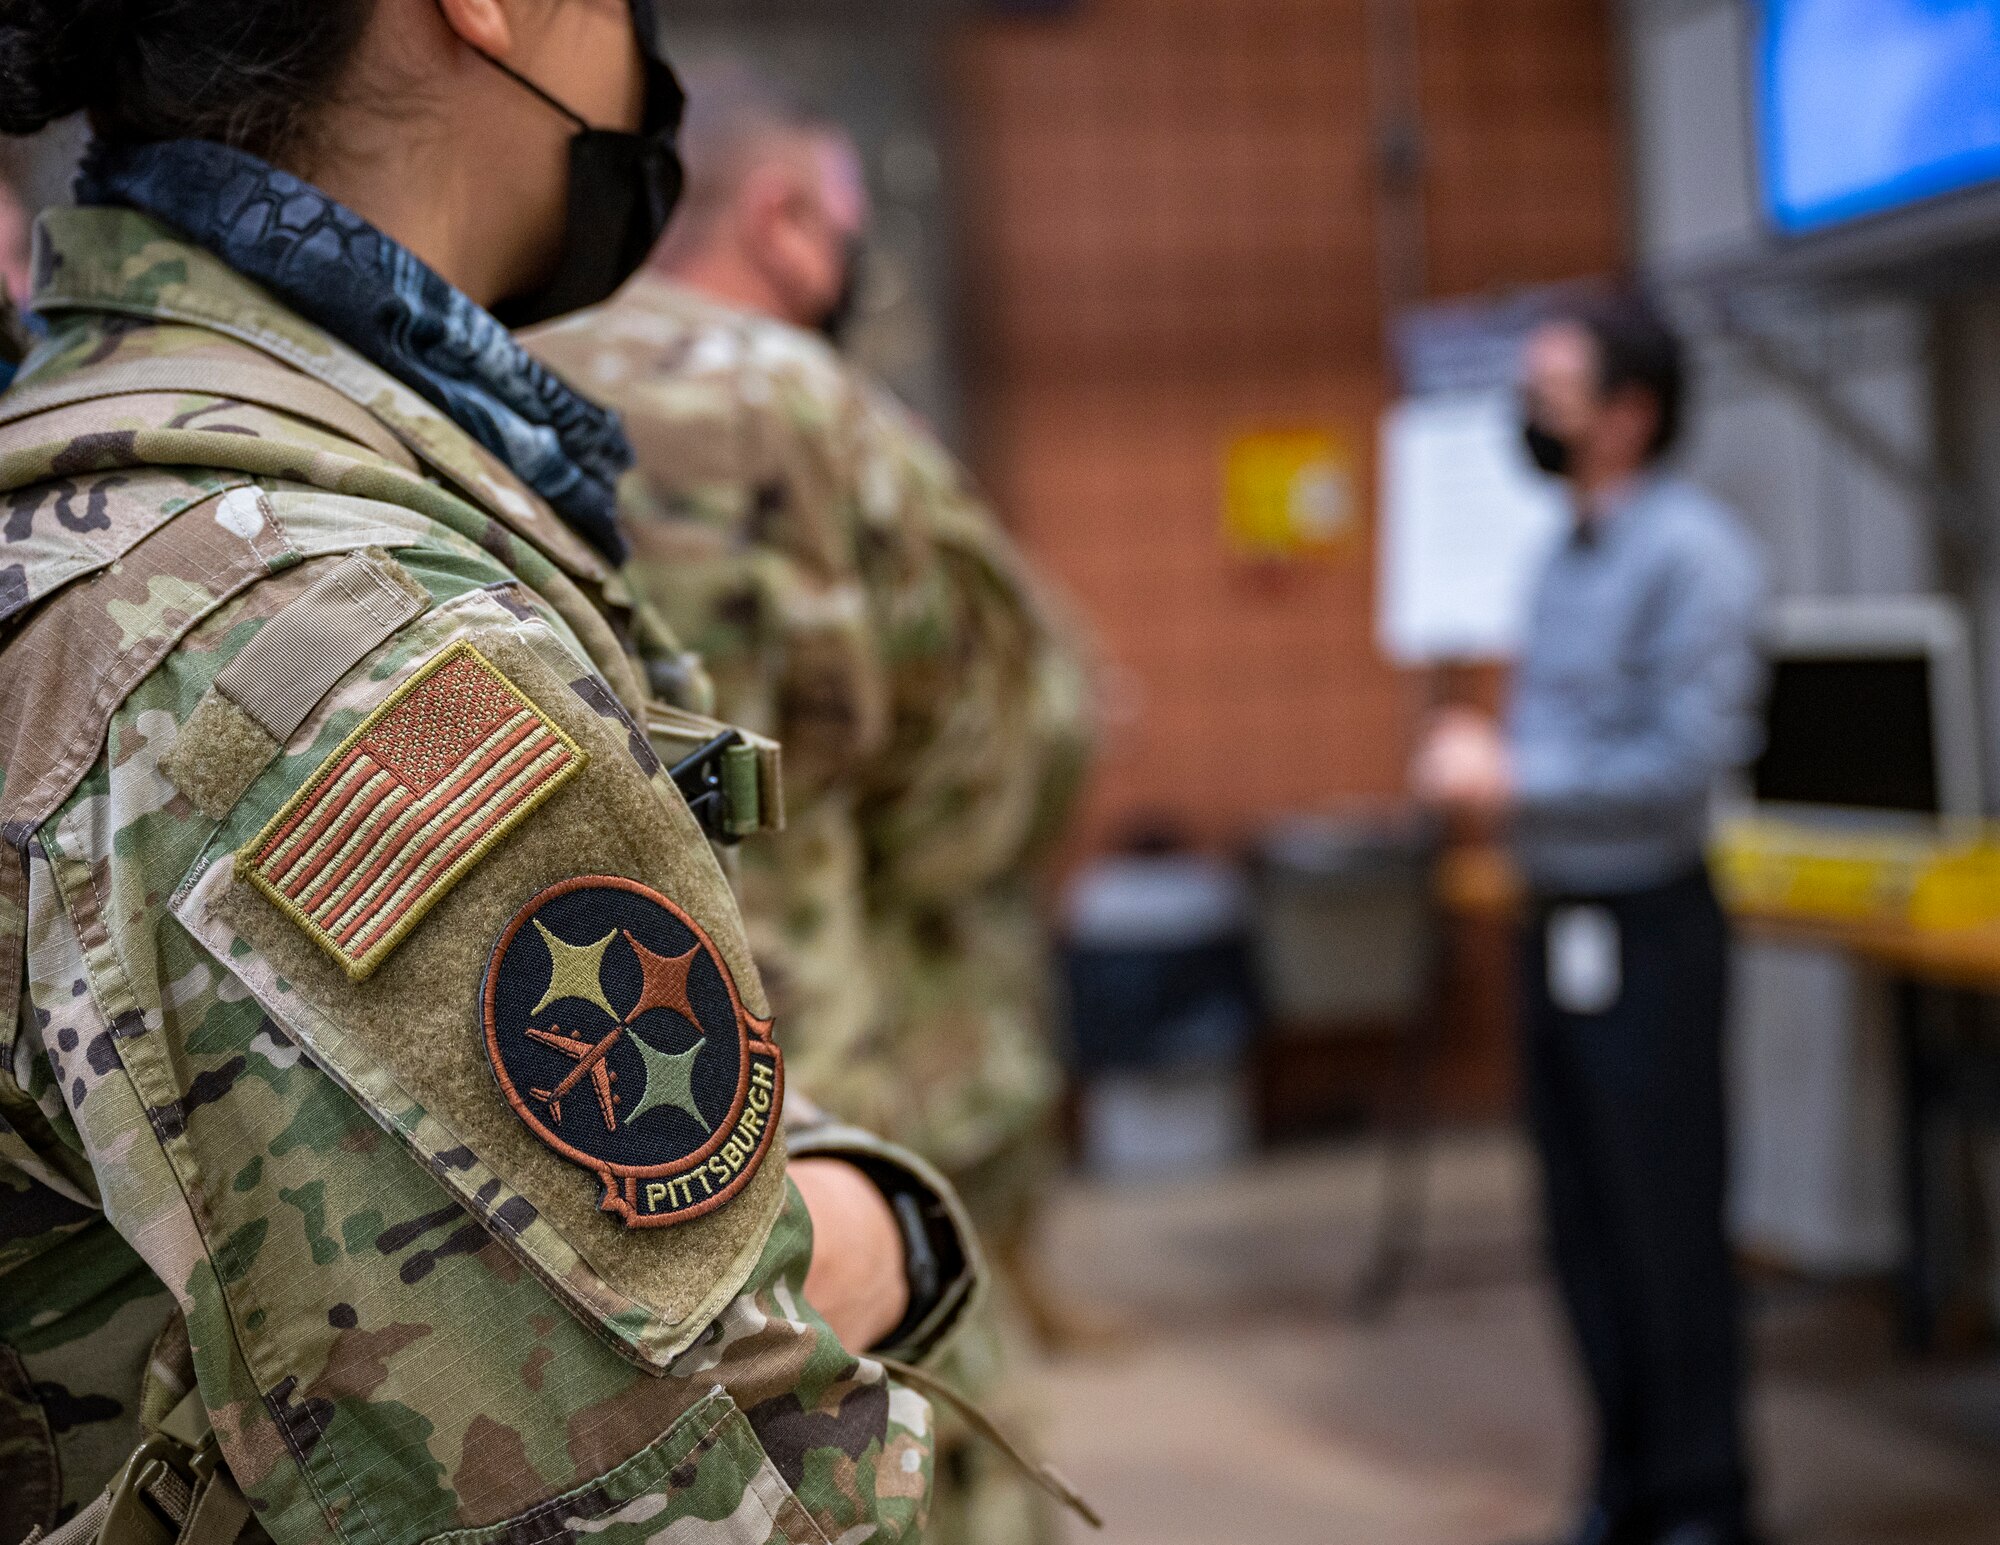 171st ARW Patch on an airman's arm during a briefing